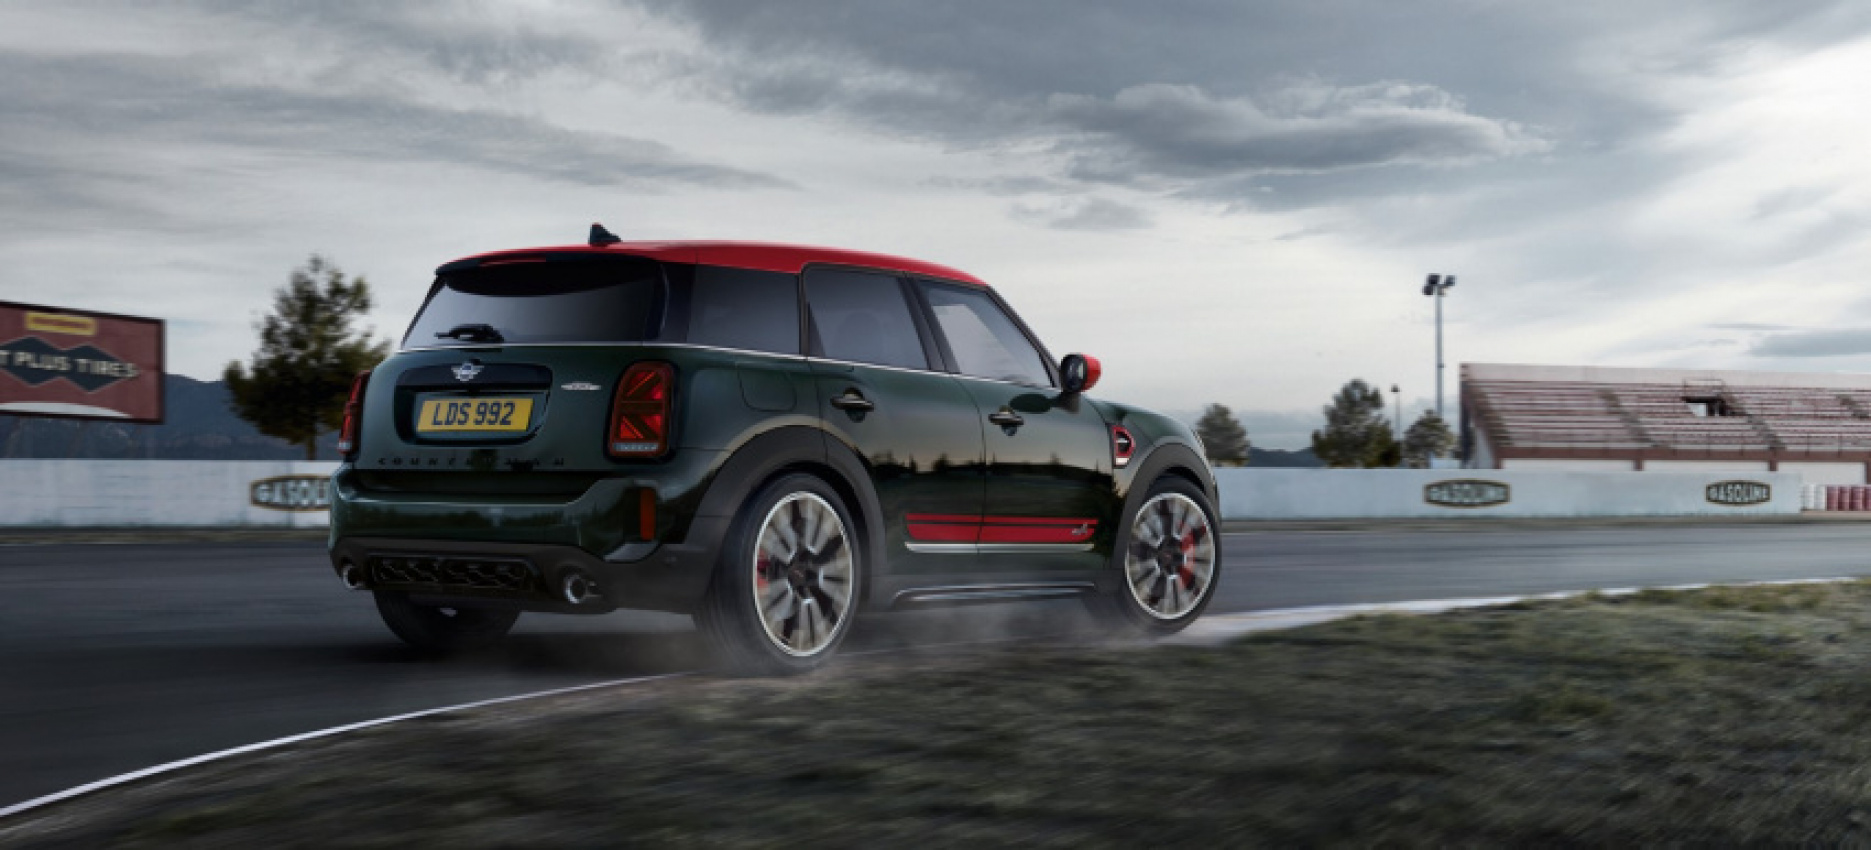 autos, cars, mini, john cooper works, mini cooper jcw, mini countryman jcw, mini john cooper works 3 door, mini john cooper works countryman, new mini jcw models launched in malaysia